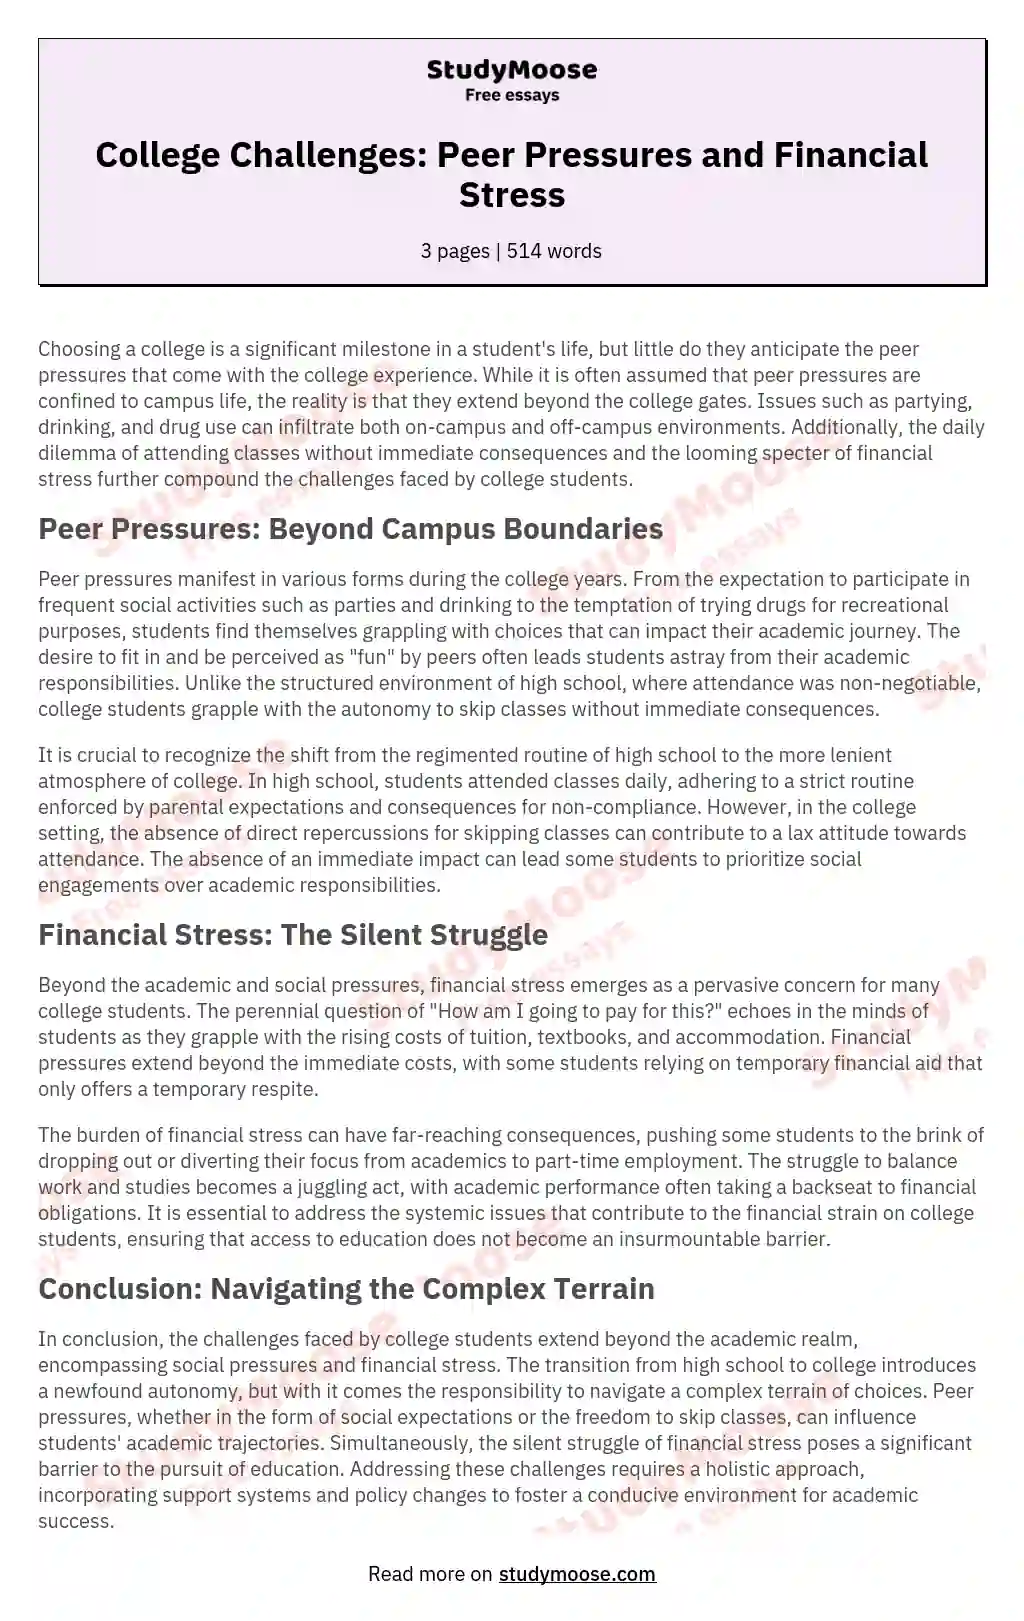 College Challenges: Peer Pressures and Financial Stress essay